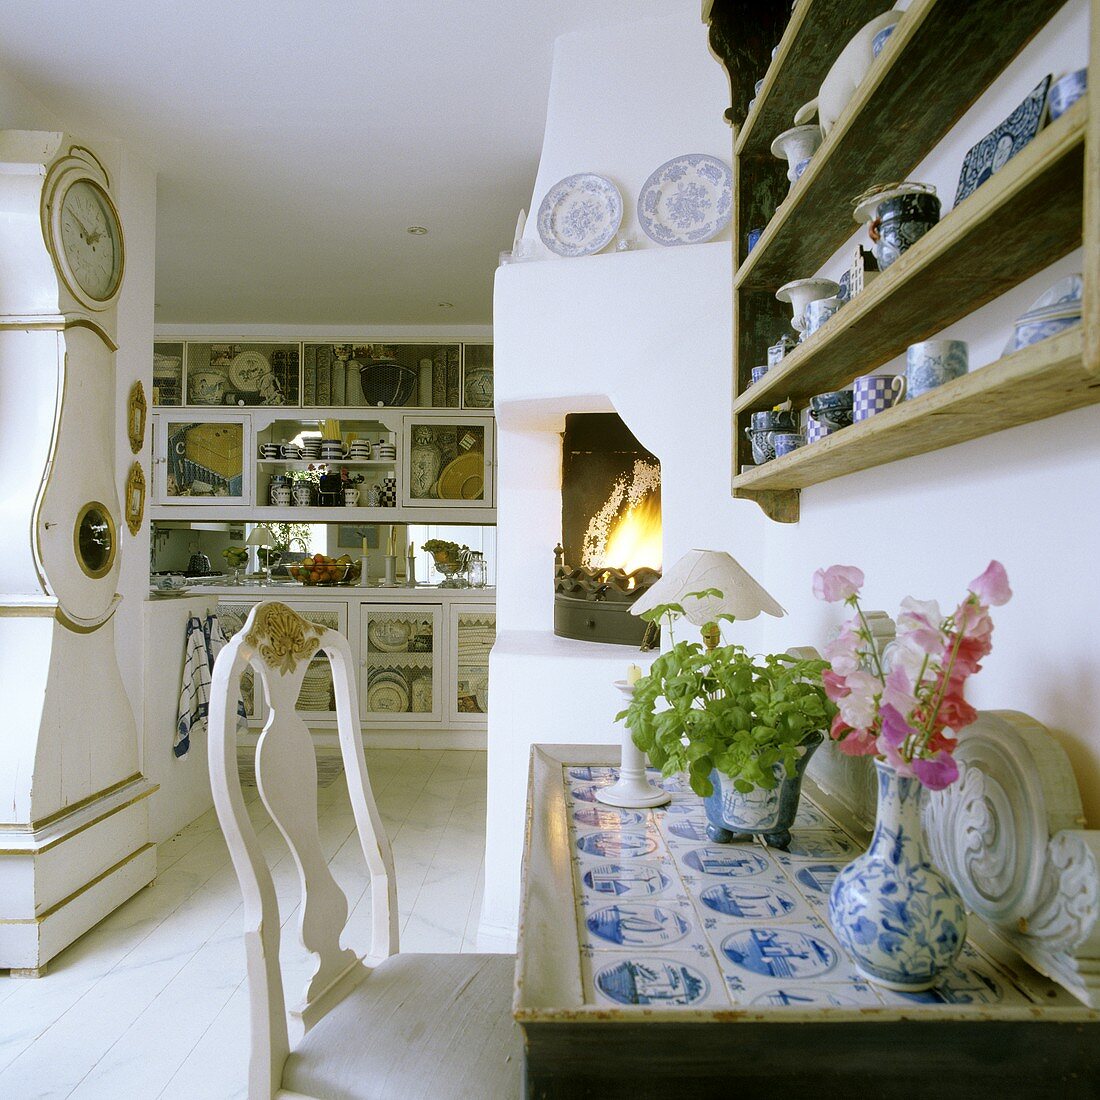 A chair in front of a wall table and an antique grandfather clock in an English kitchen